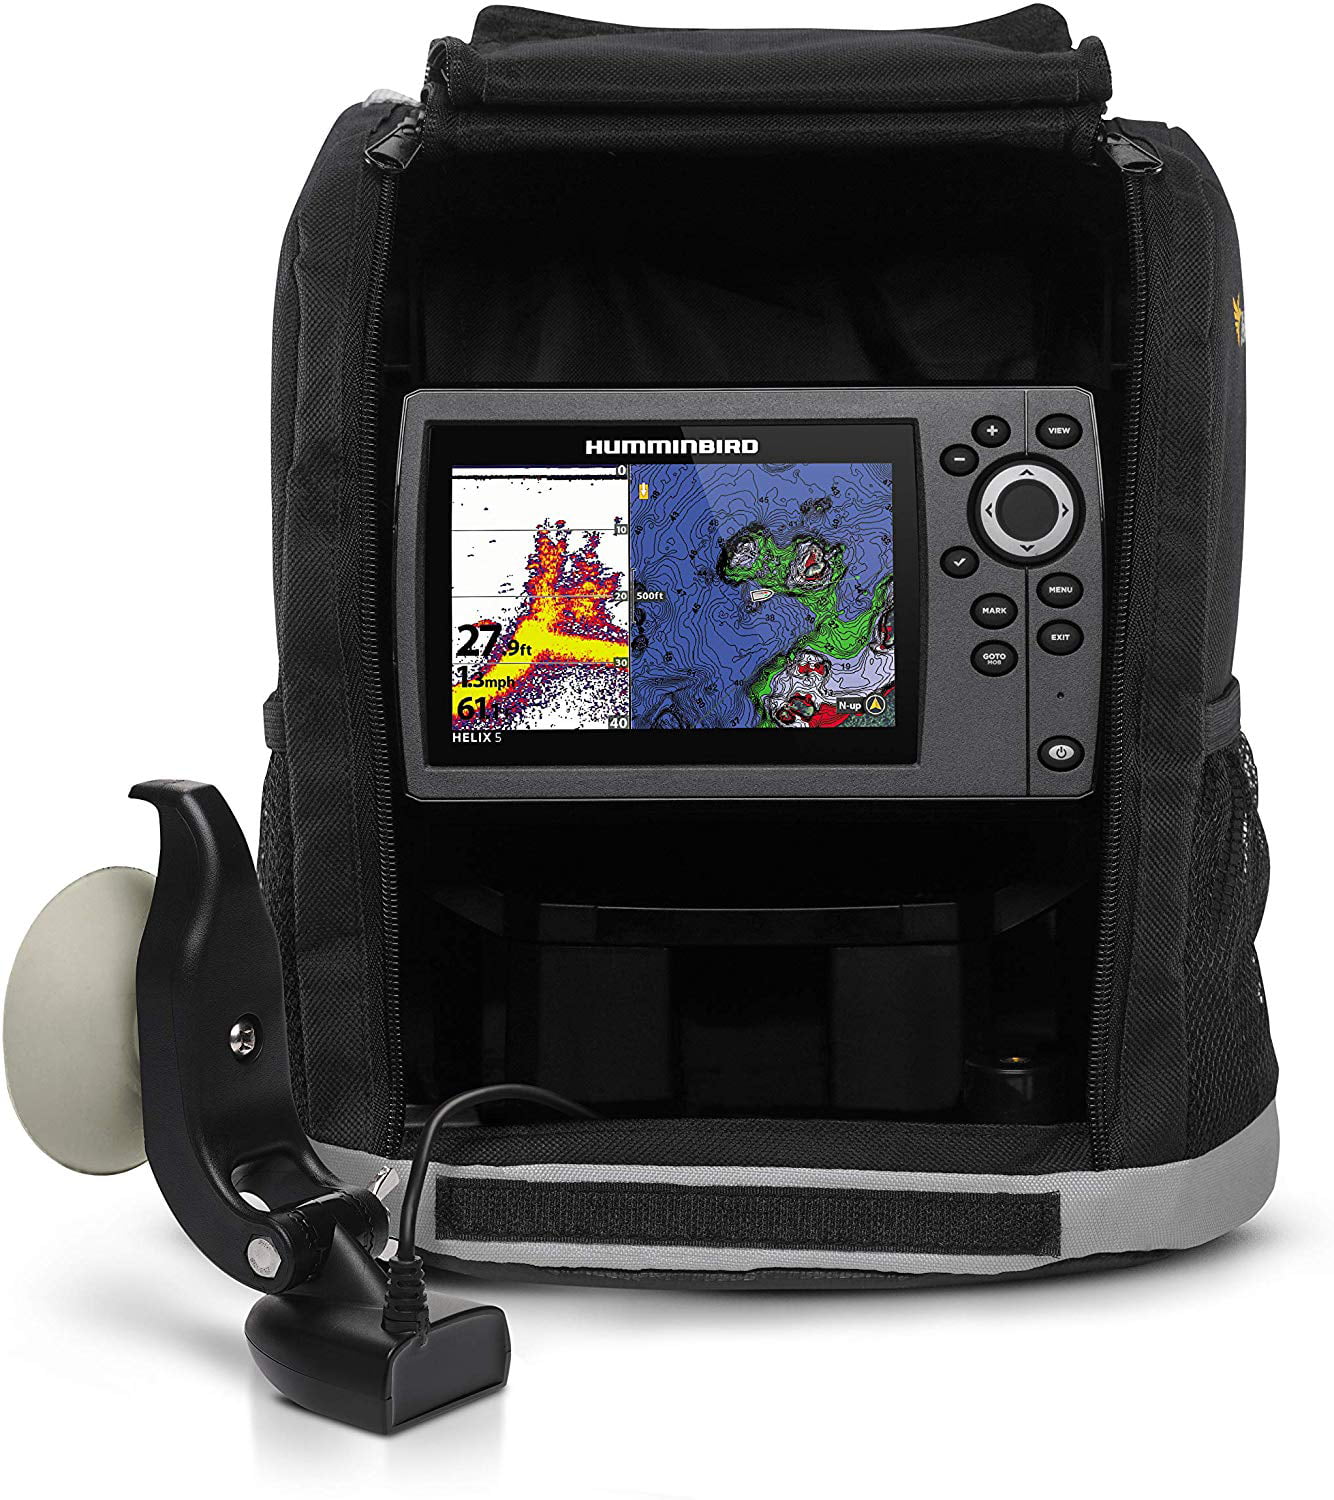 humminbird-helix-5-g2-series-fish-finder-410260-1-5-inch-color-wvga